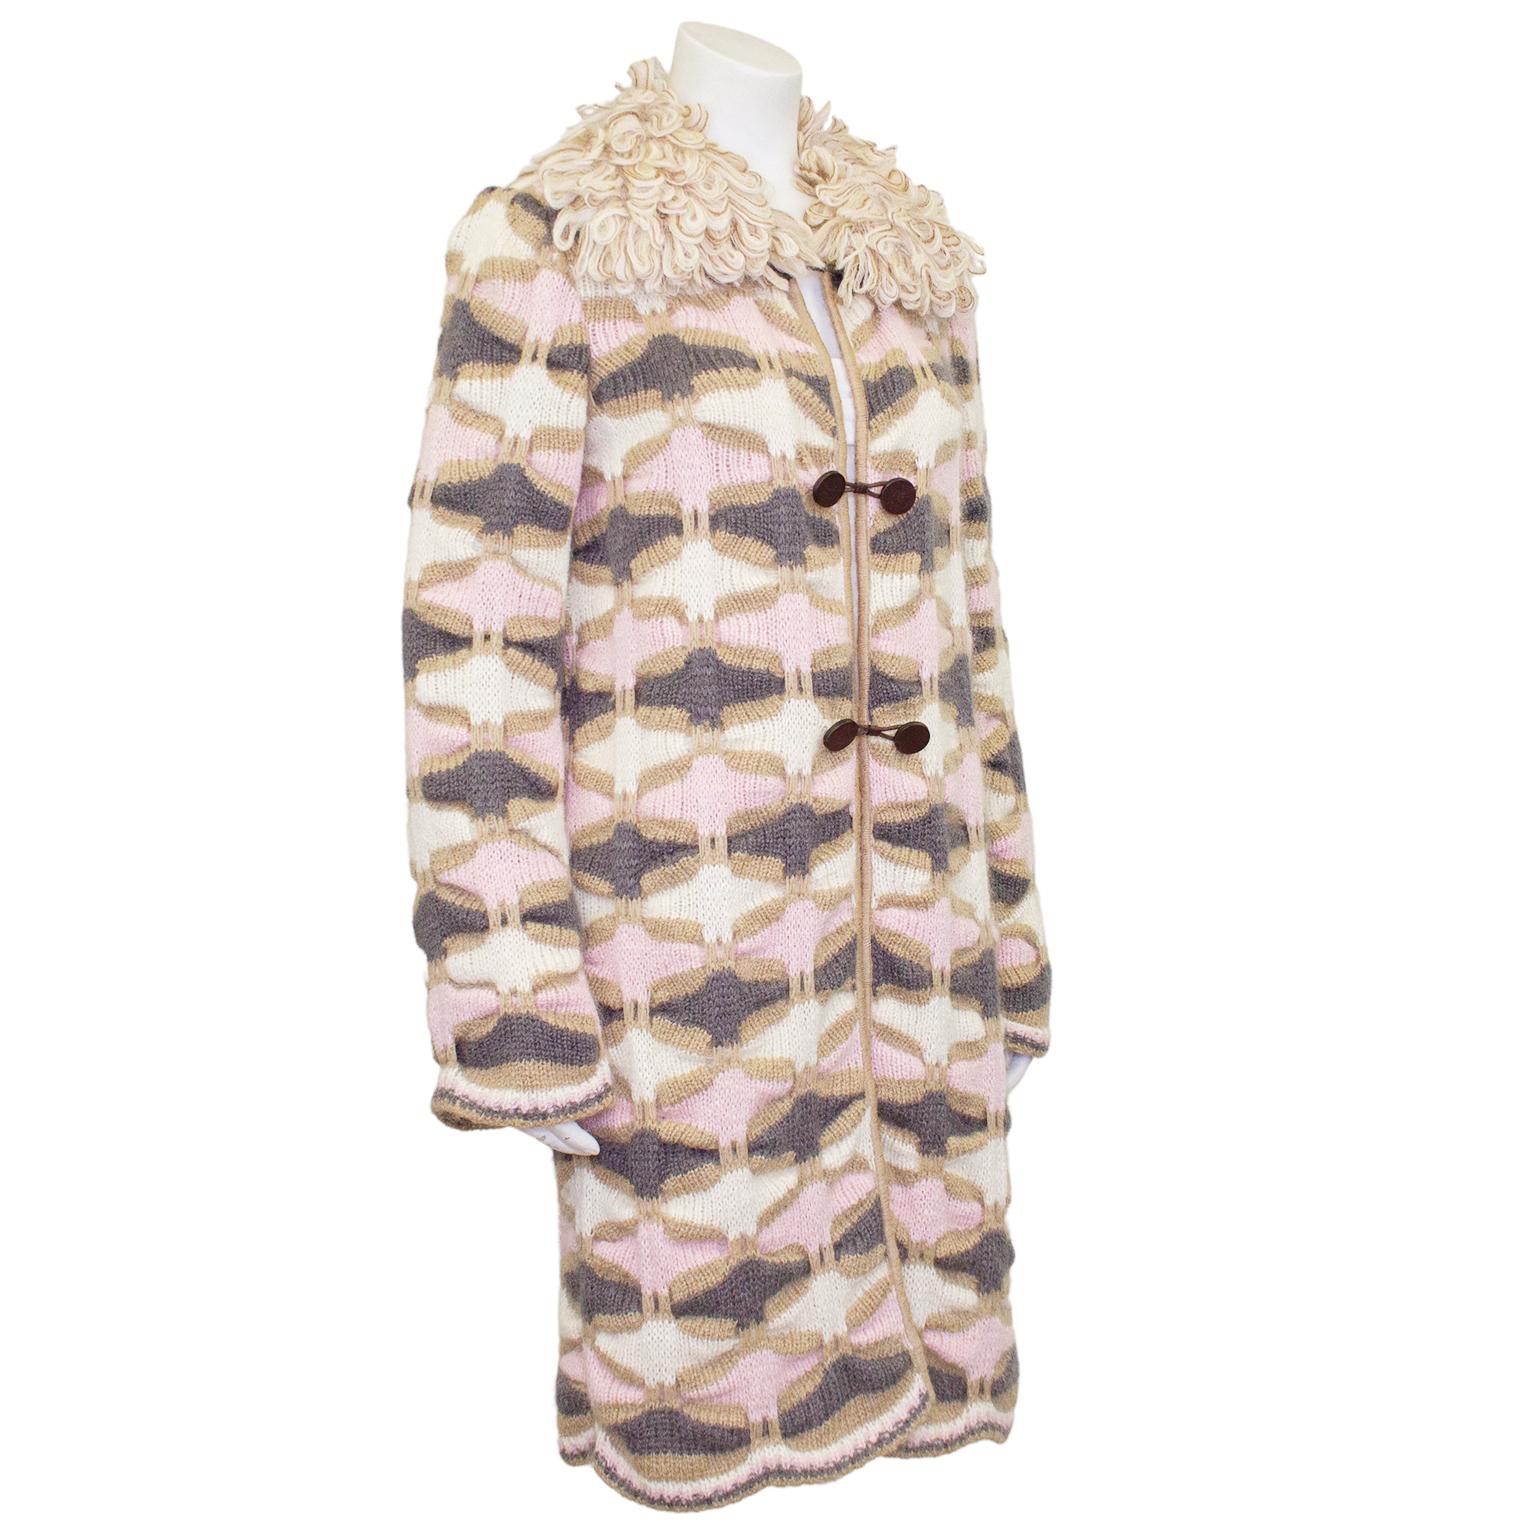 1990s Missoni knit car coat cardigan. Pale pink, cream, beige and grey patterned wool with an oversized beige and cream looped yarn collar. Brown leather toggle style buttons. Scallop edge at cuffs and hem, unlined. Perfect for Spring/Fall.